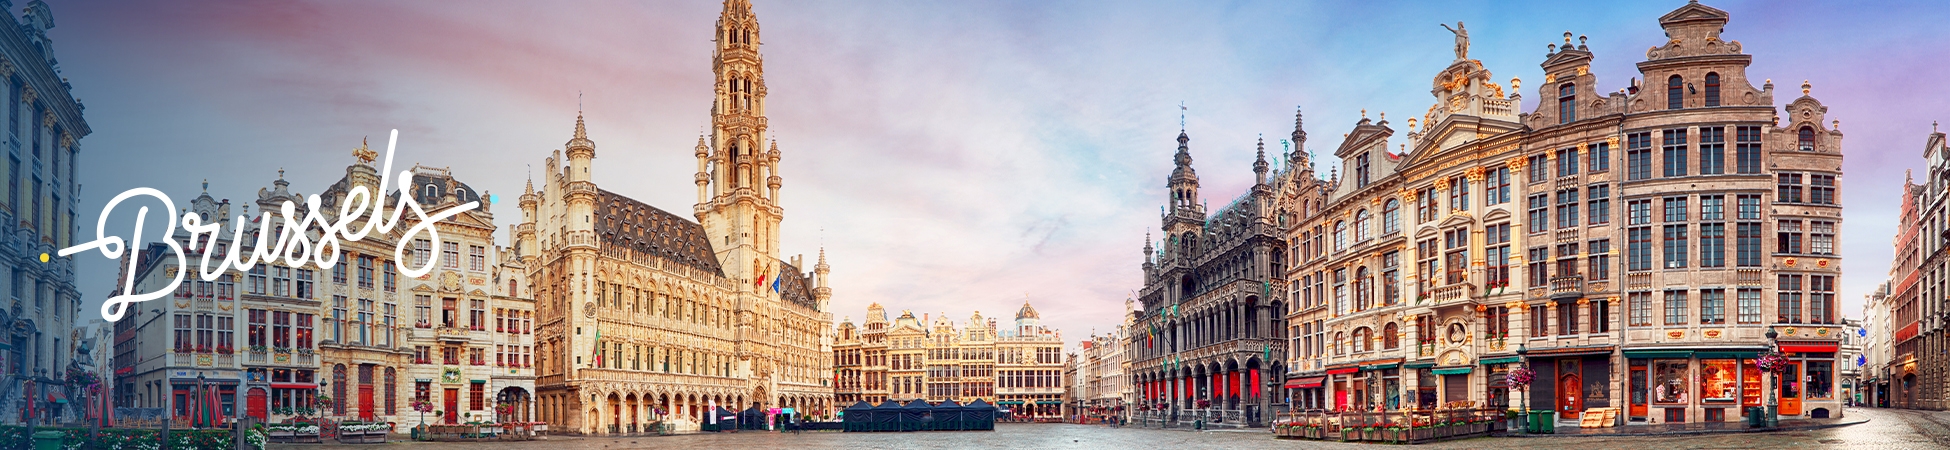 Cheap flights to Brussels